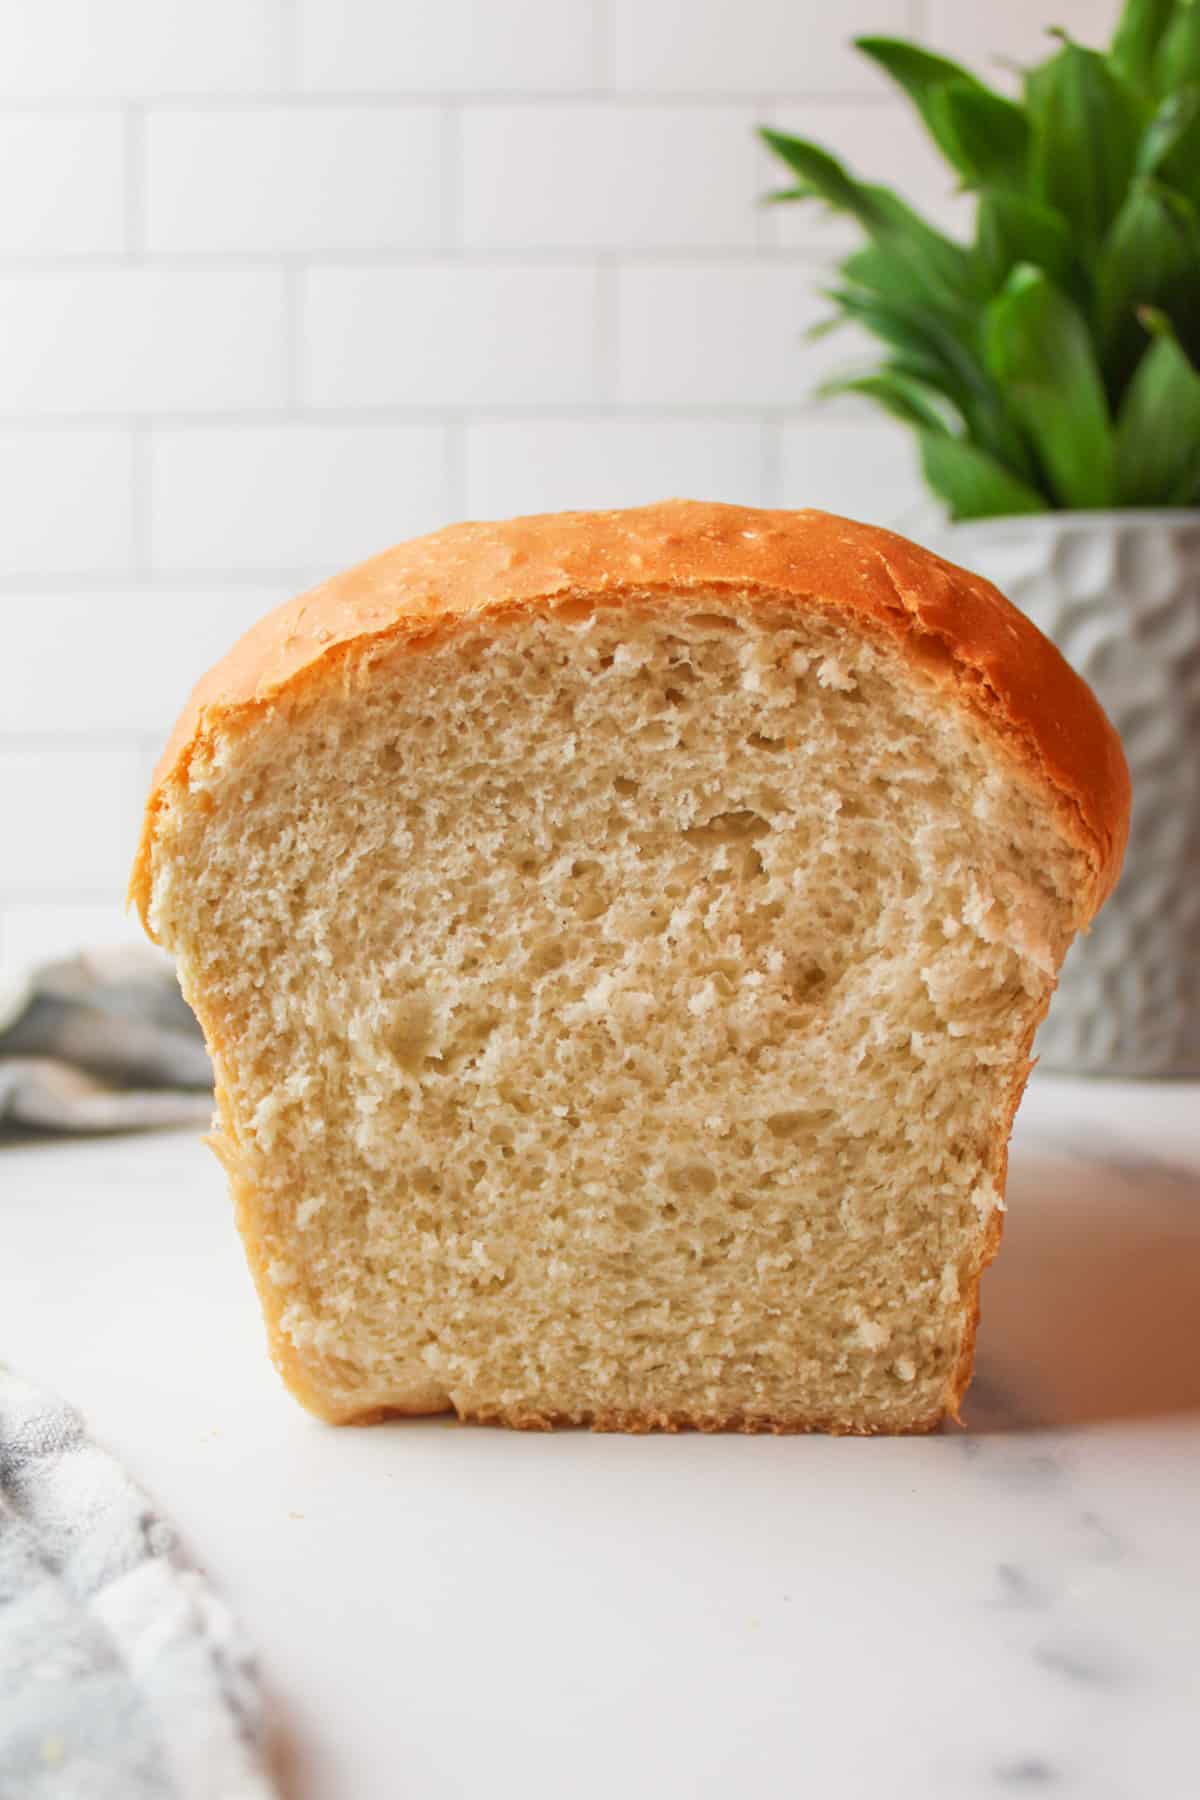 a loaf of white bread that has been sliced open to reveal the soft crumb inside.